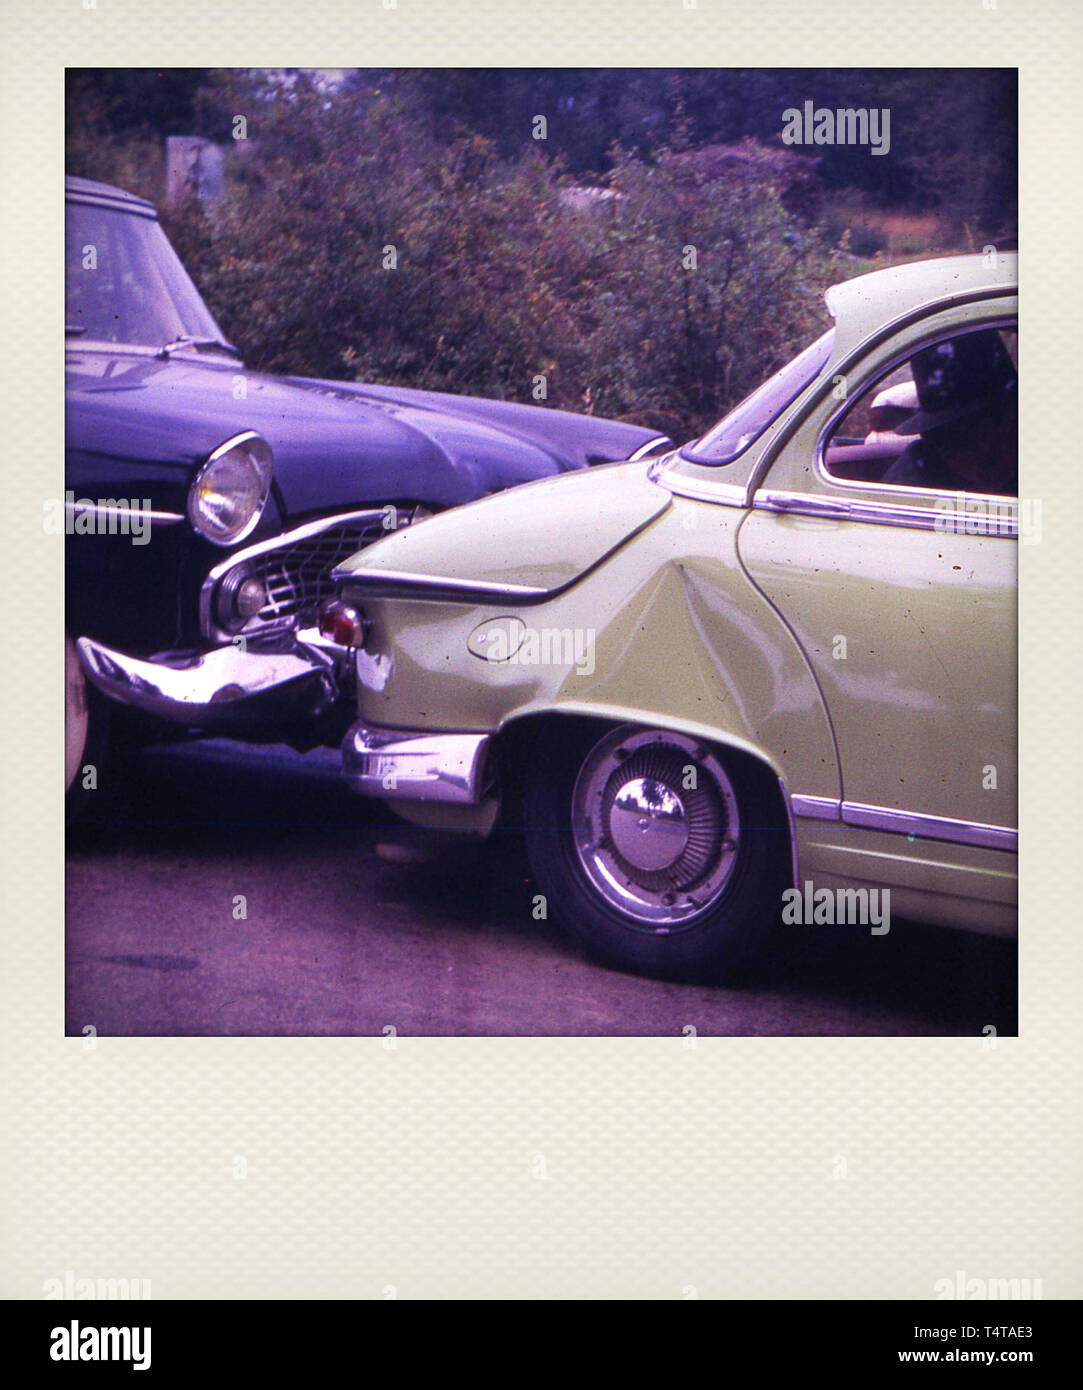 Bumpers crashed between two old cars Stock Photo